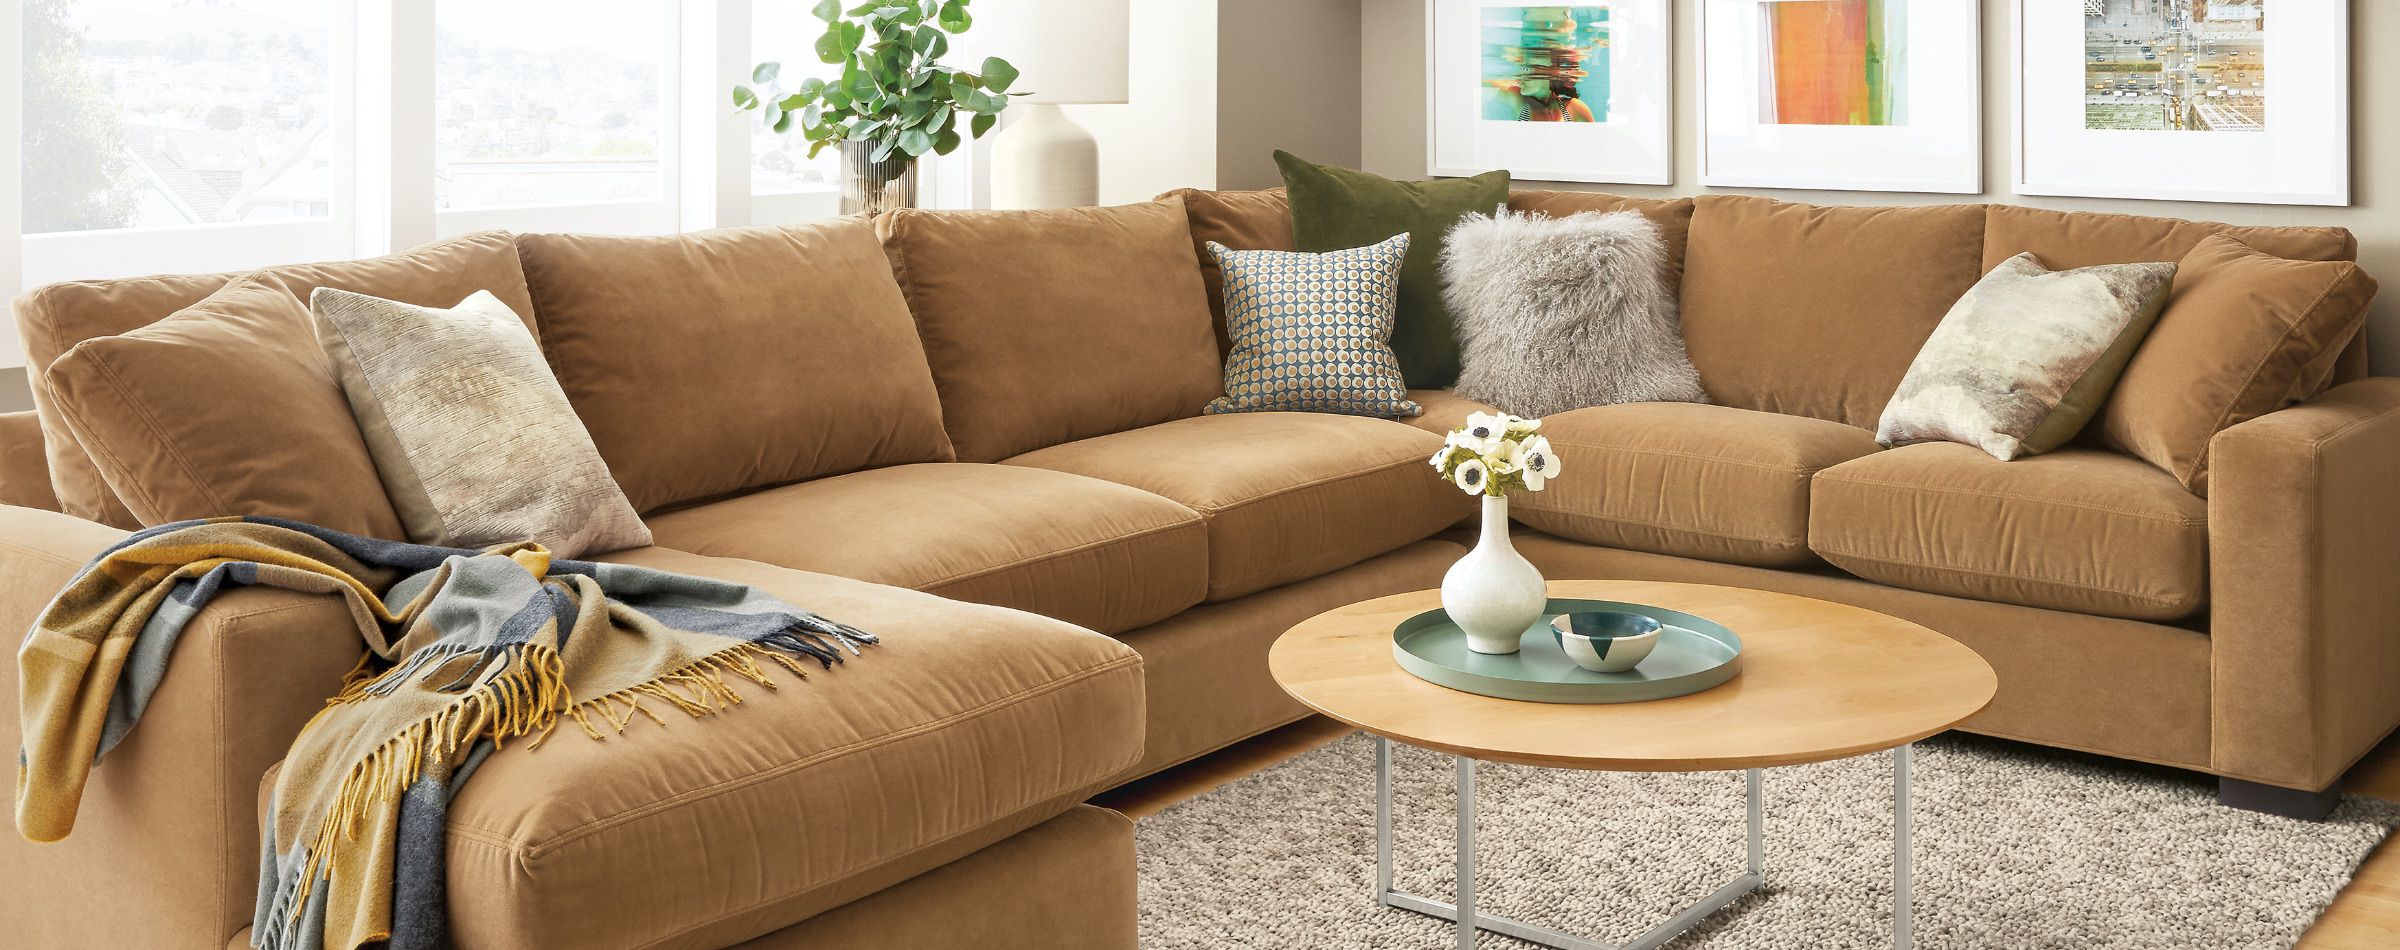 Metro Sofas & Sectionals - Room & Board